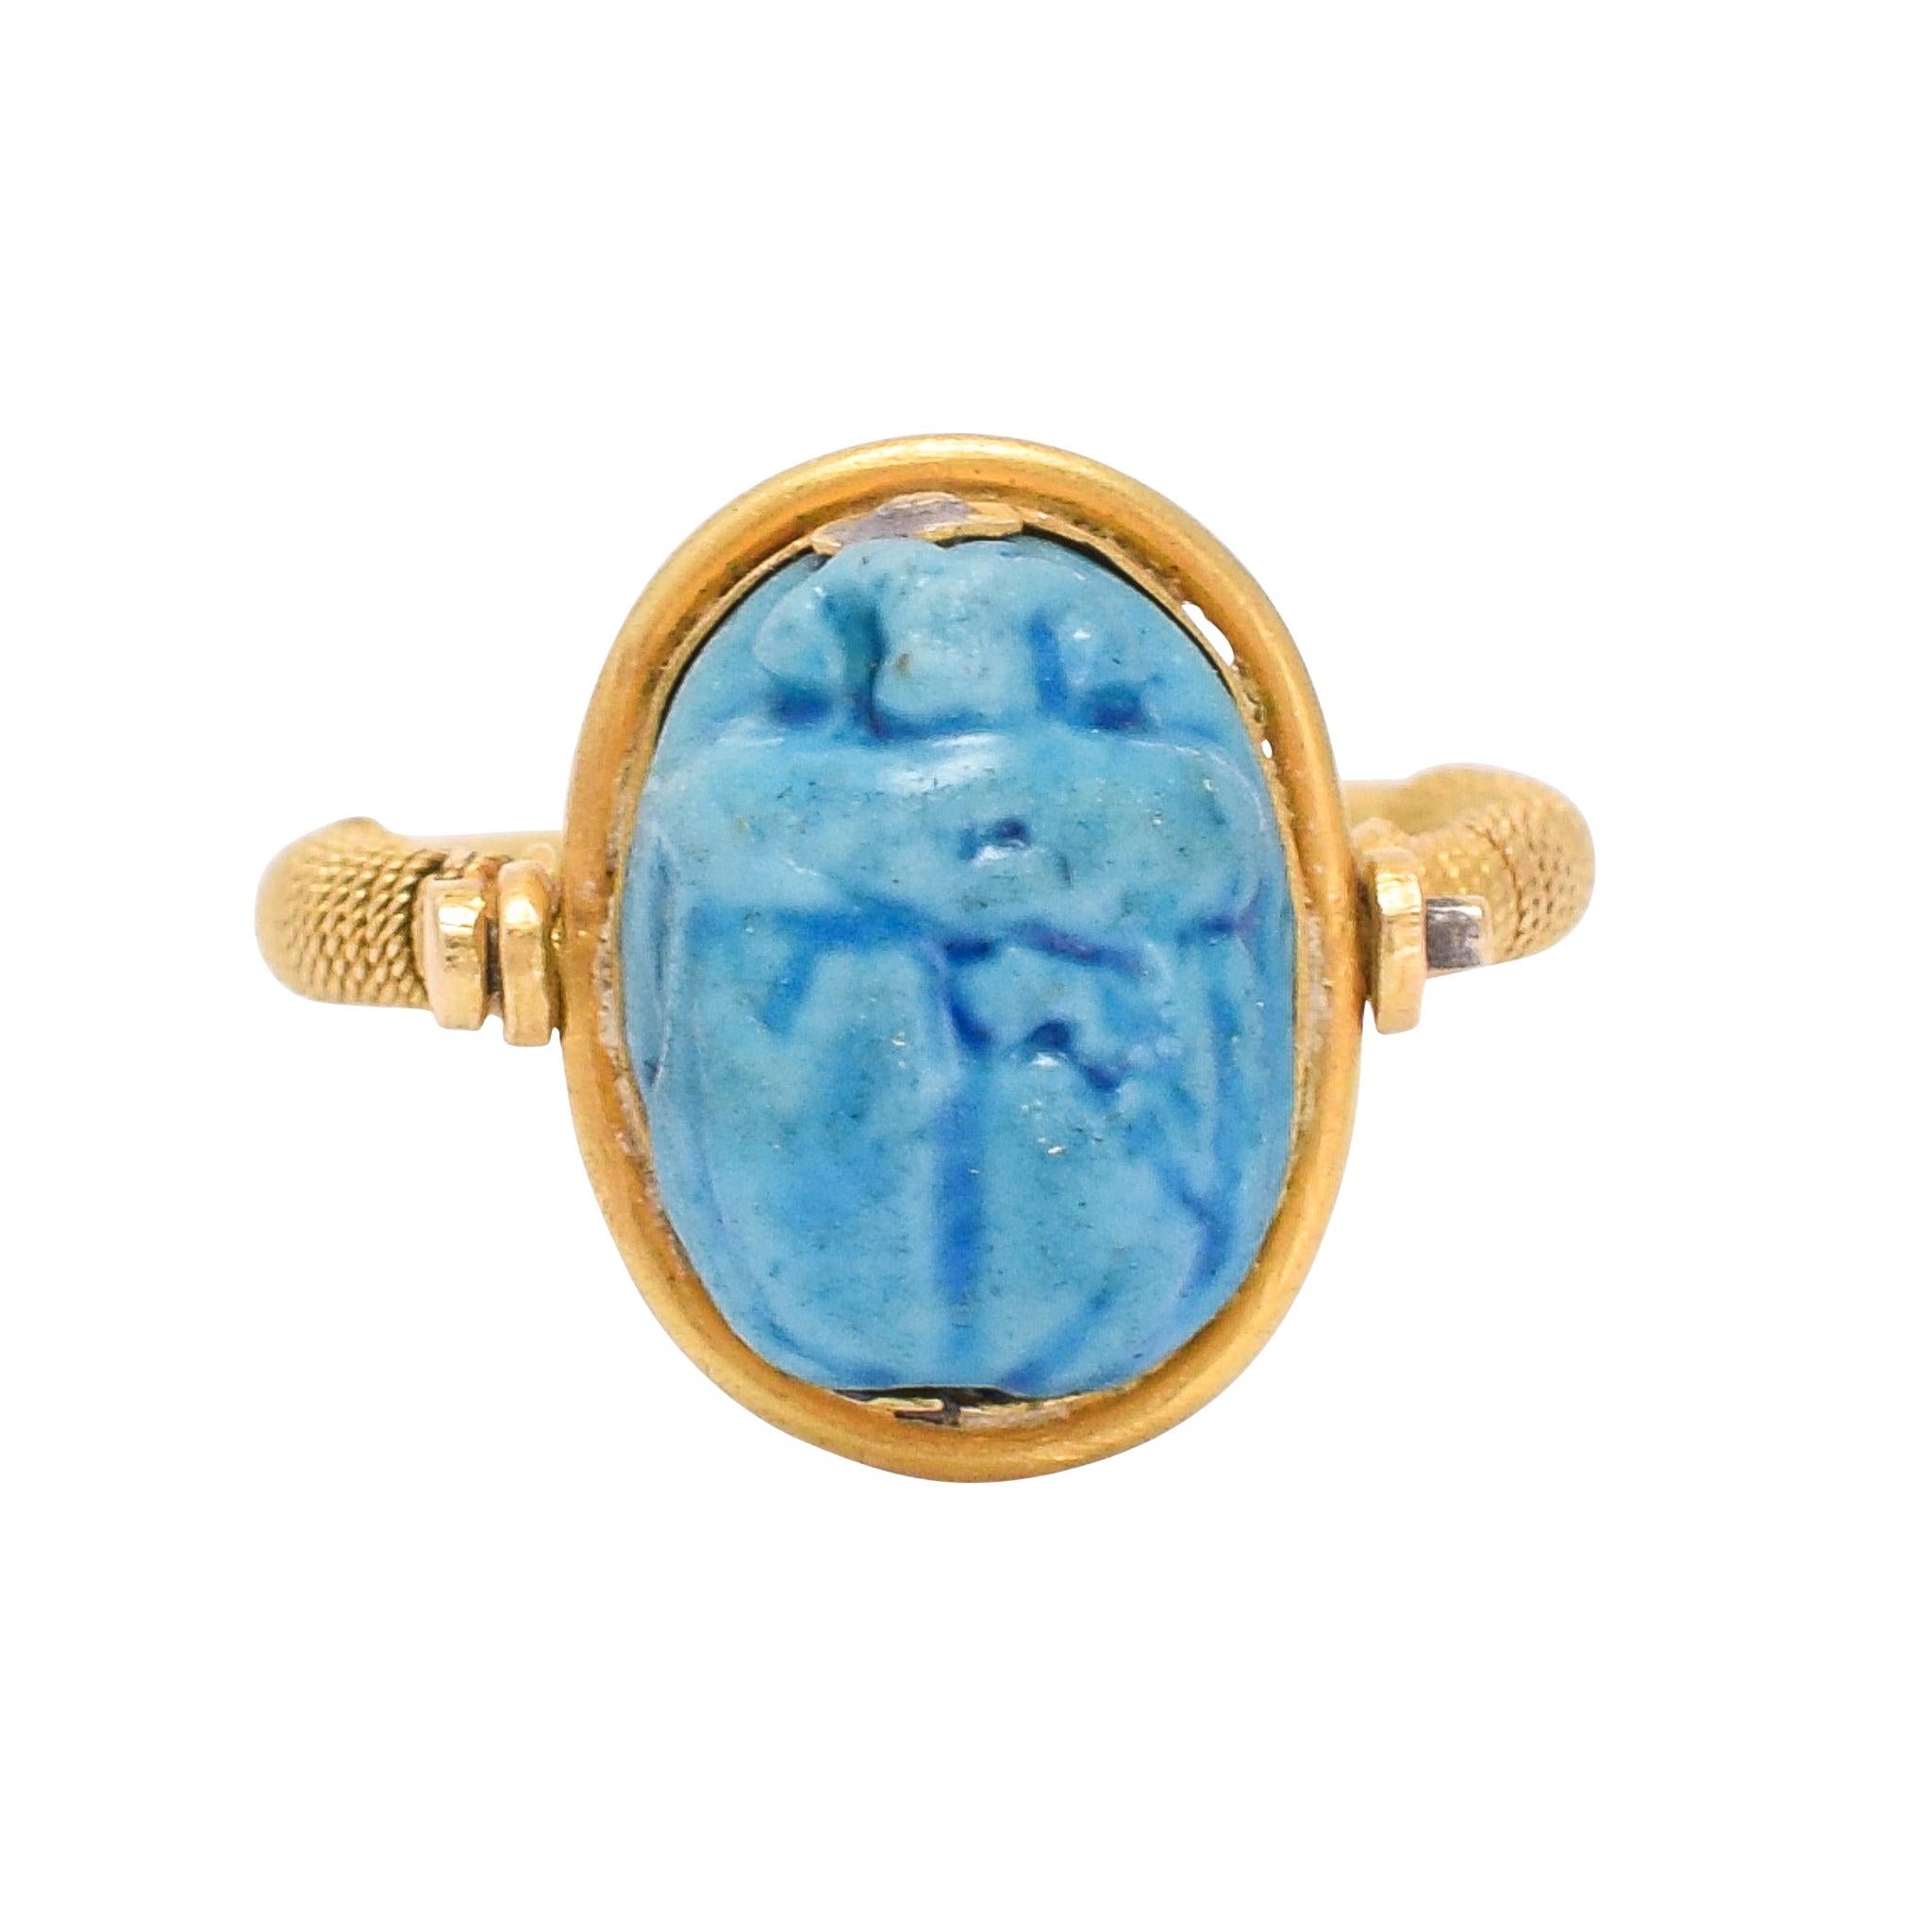 Antique Victorian Egyptian Revival Faience Scarab Spinner Ring